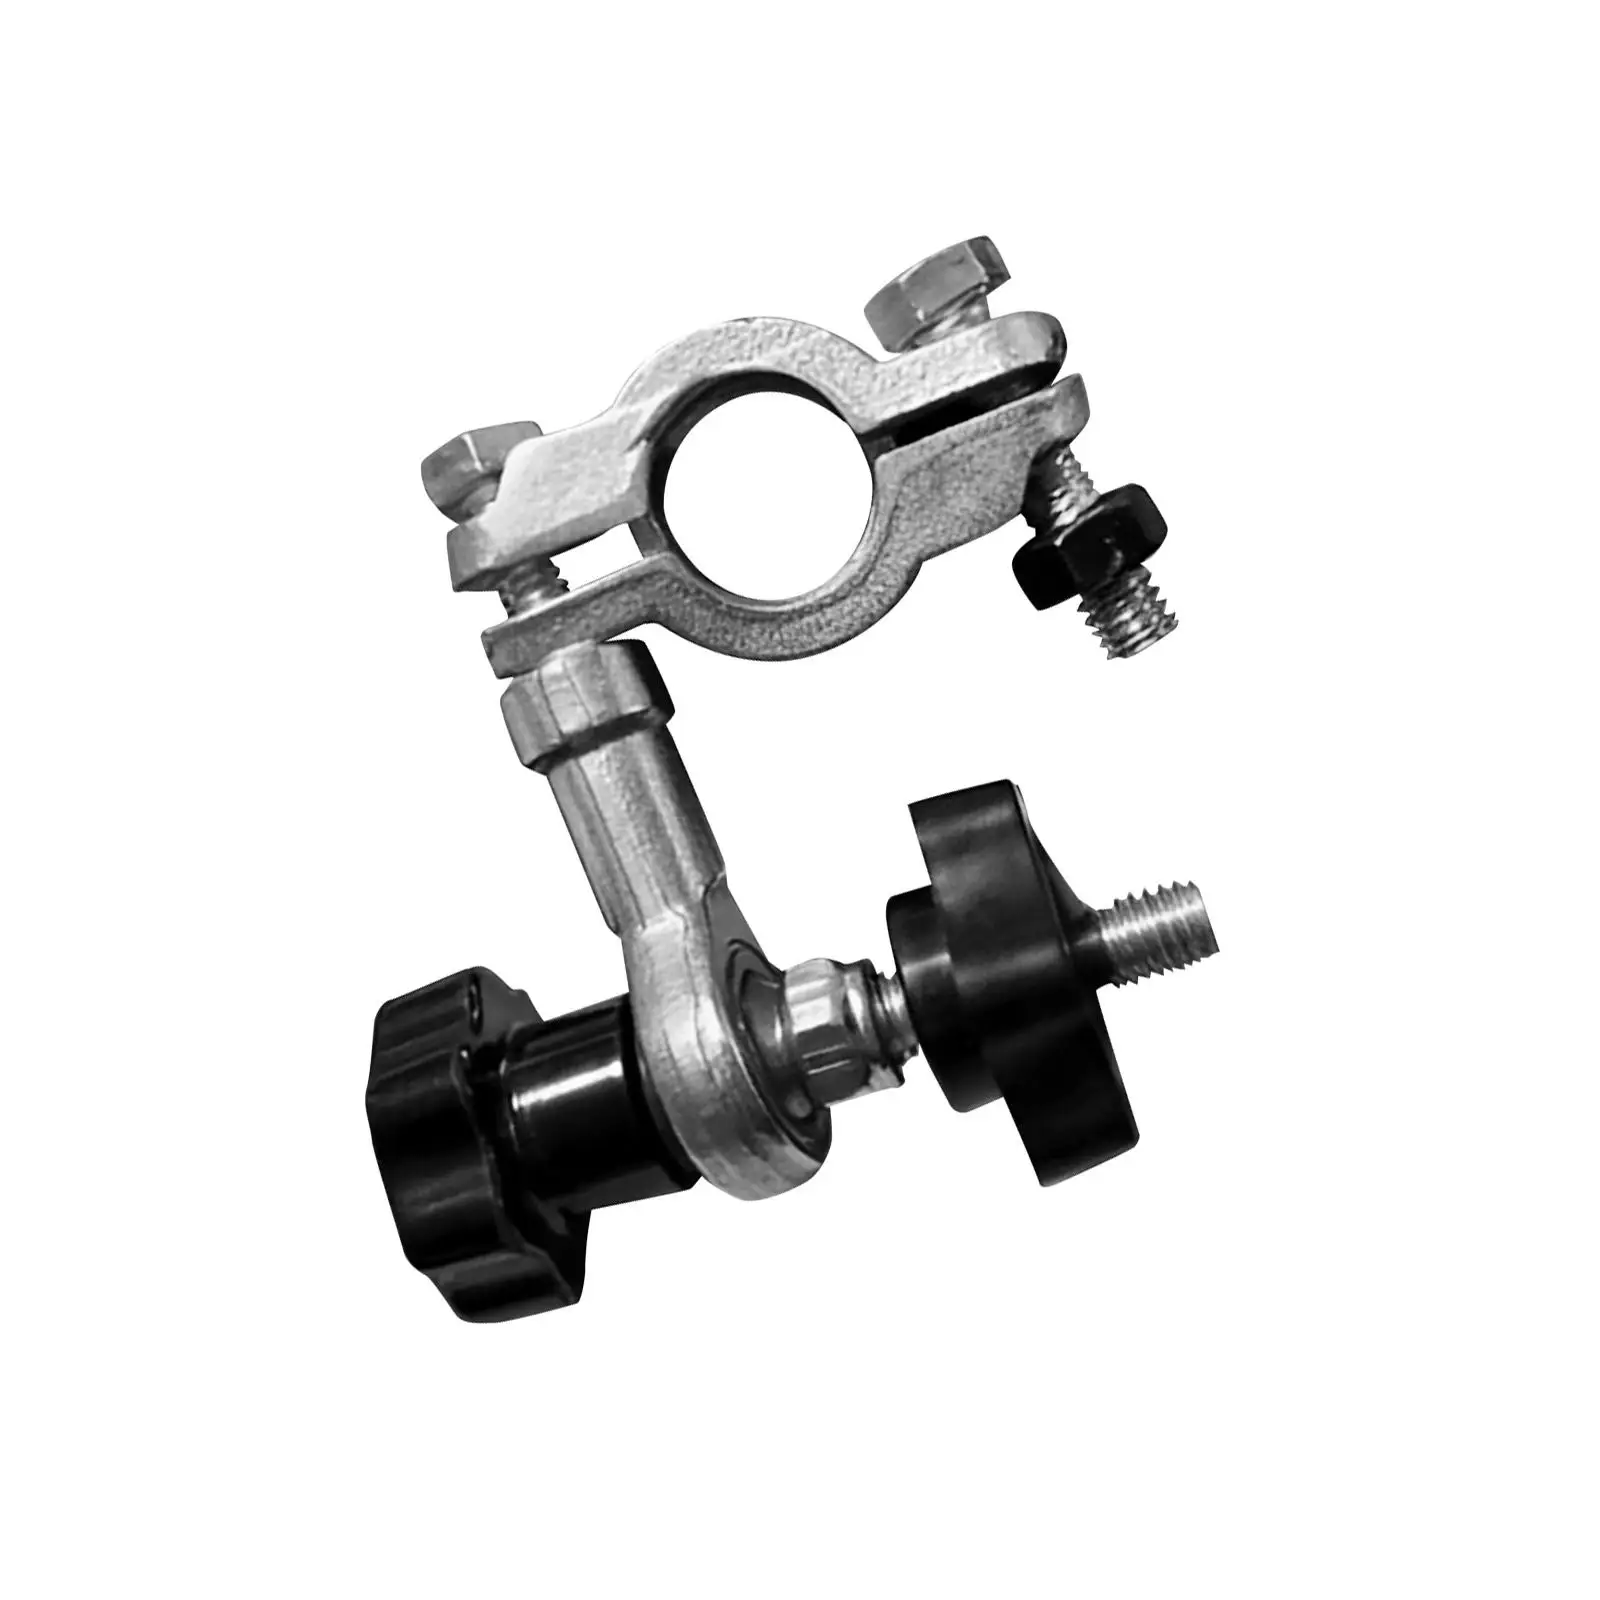 Bicycle Rear Trailer Connector Coupler Attachment Accessory for Most Bike